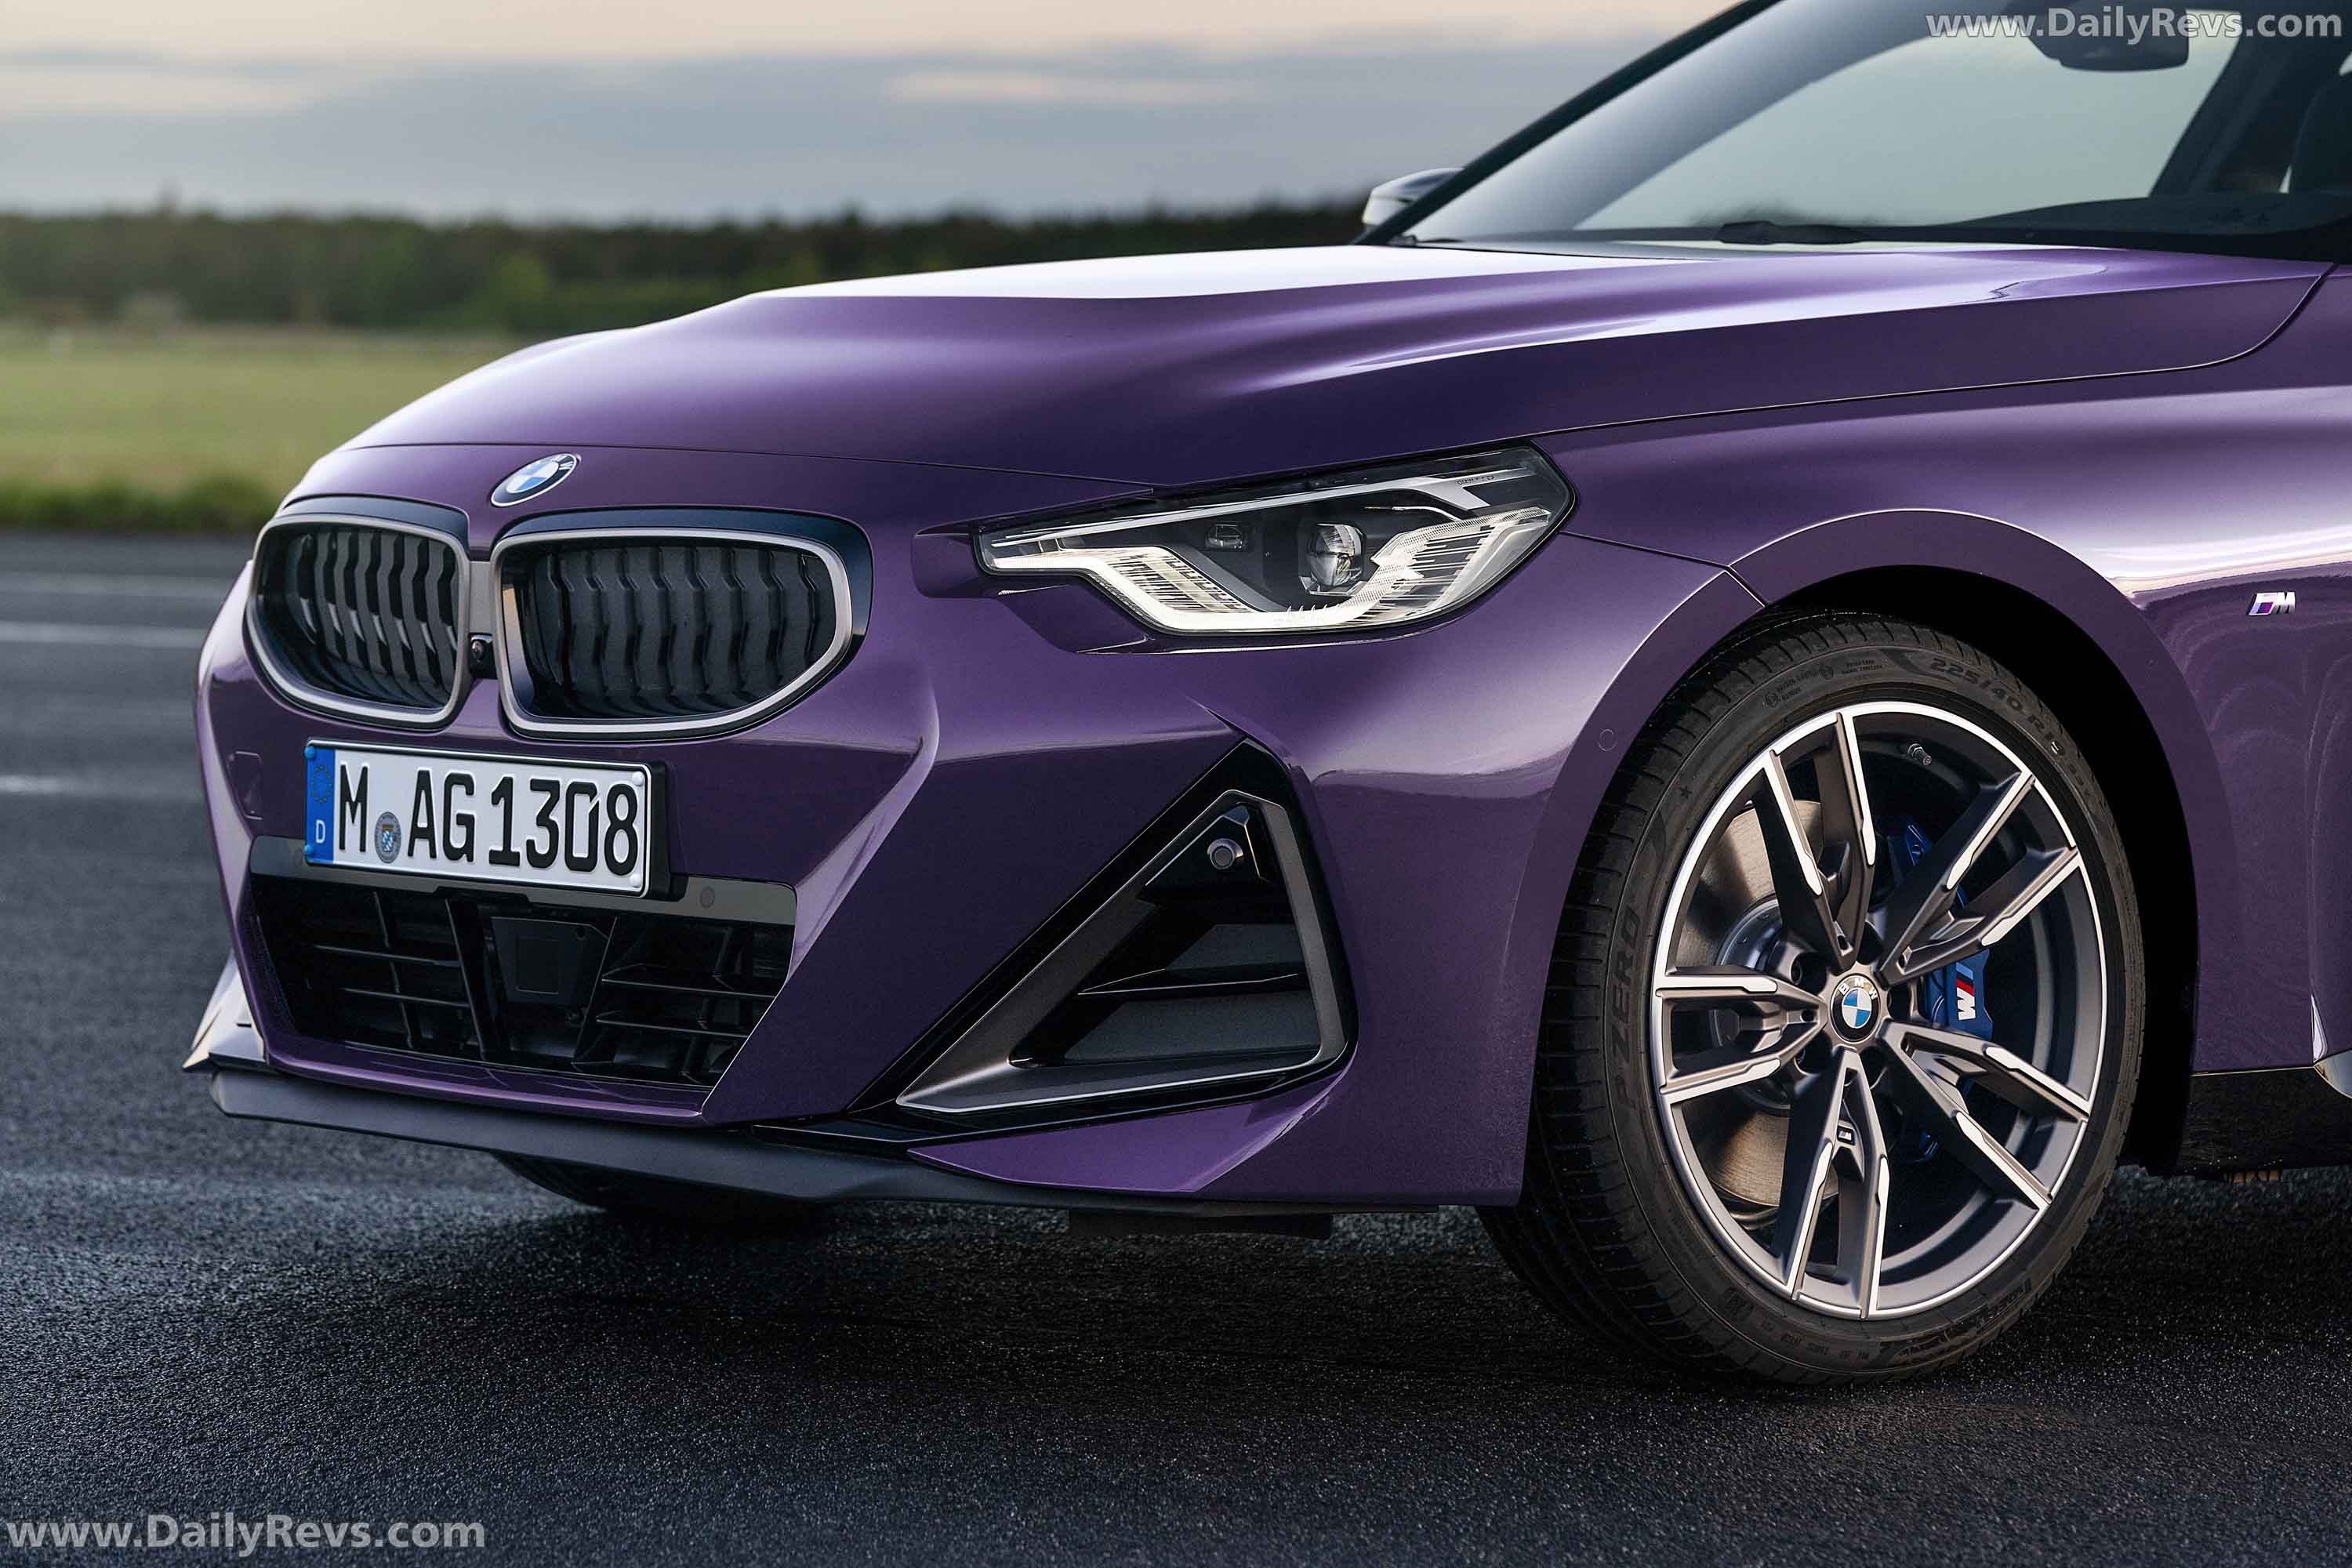 2022 BMW M240i xDrive Coupe - Dailyrevs